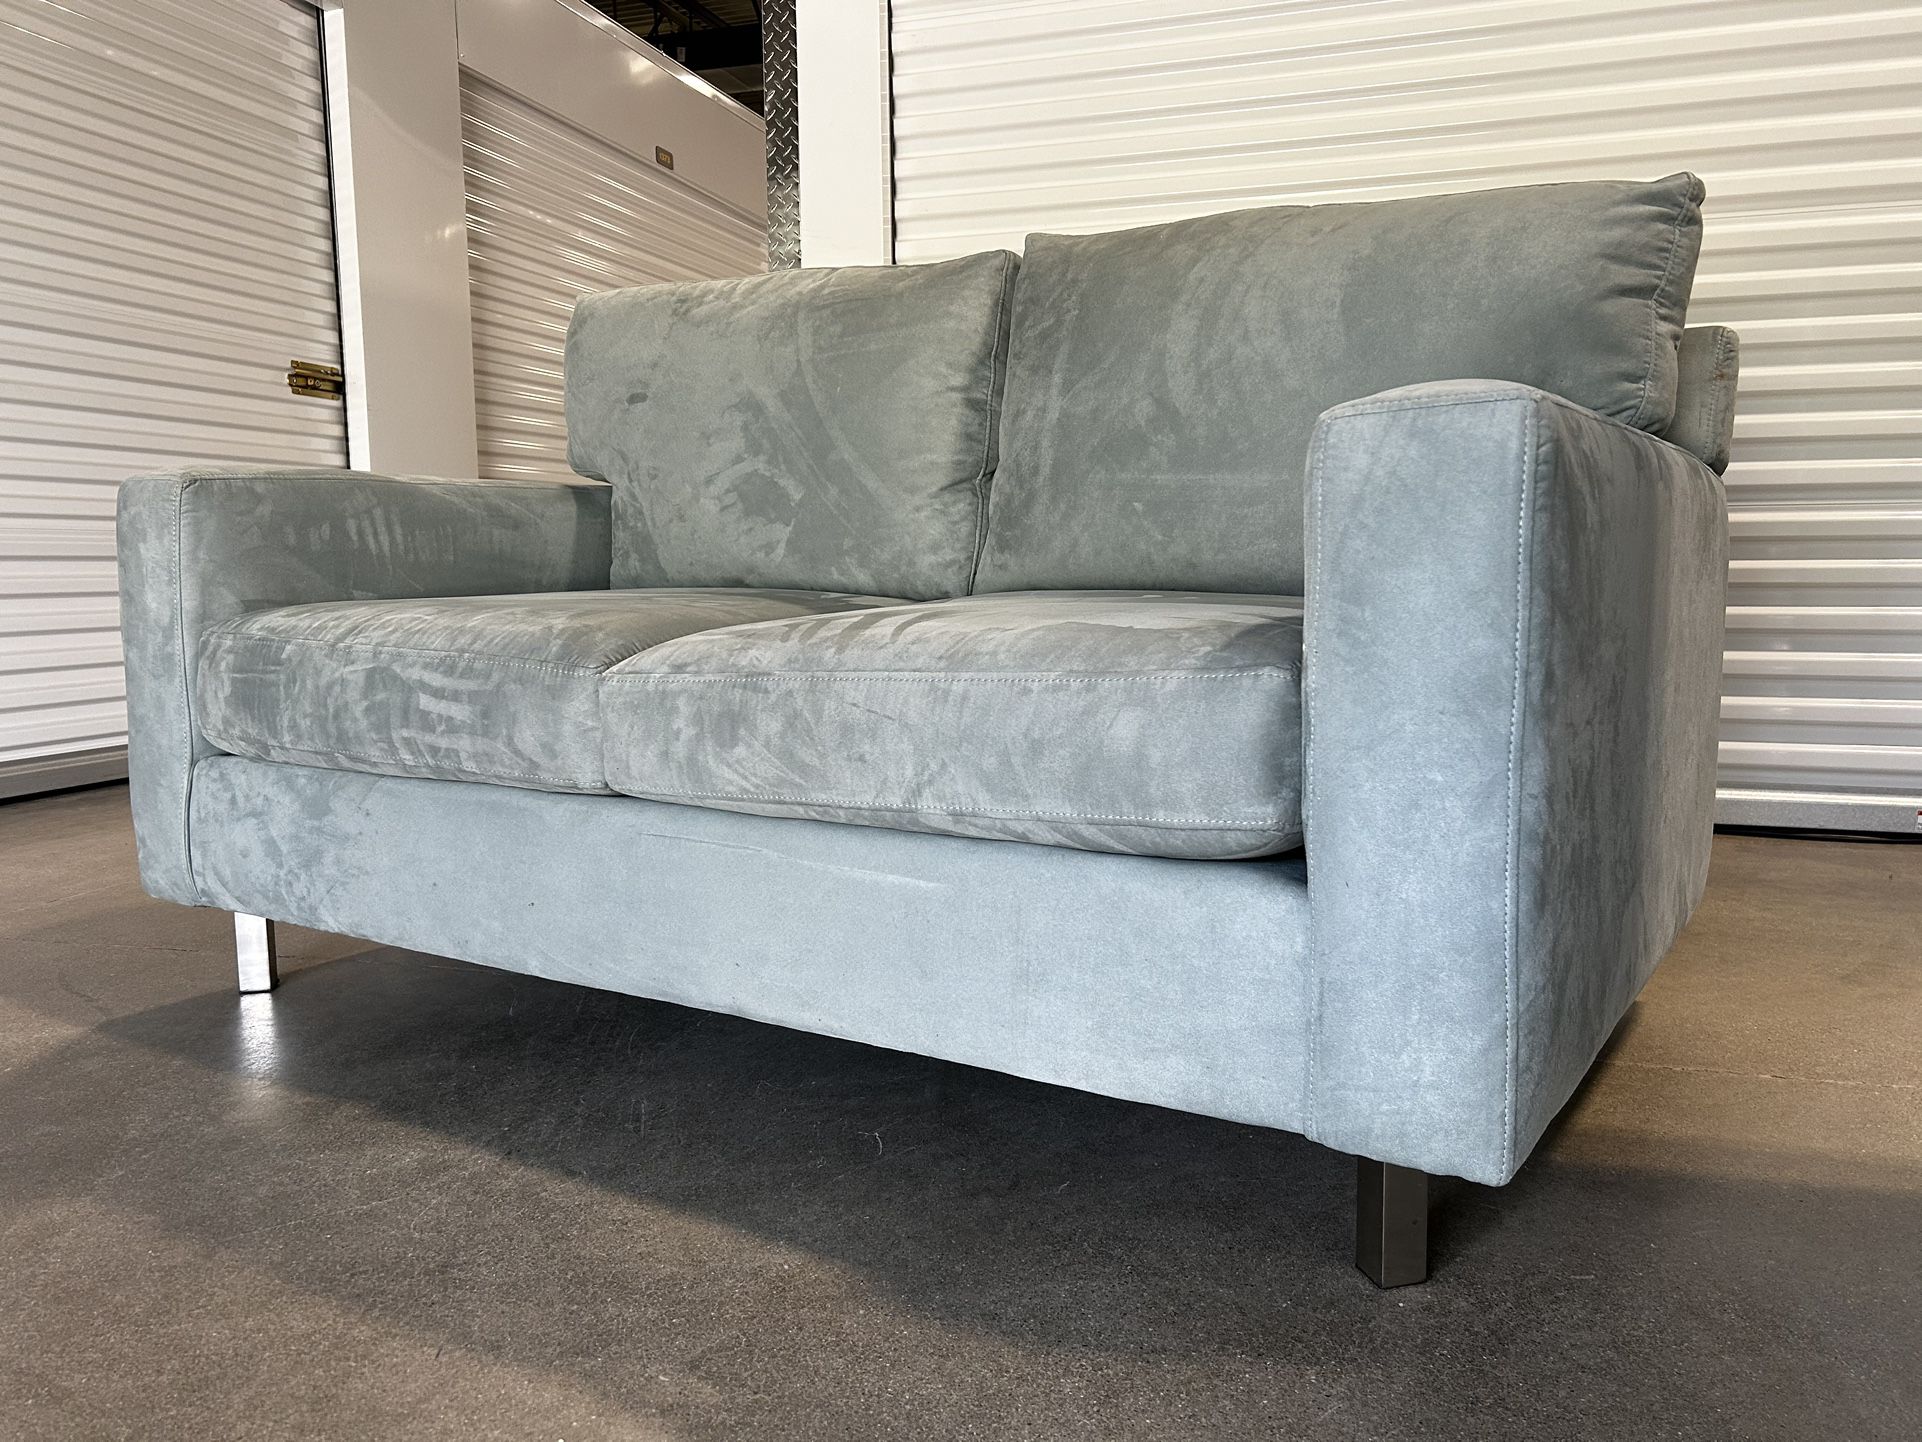 Free Delivery (Like New) Loveseat 